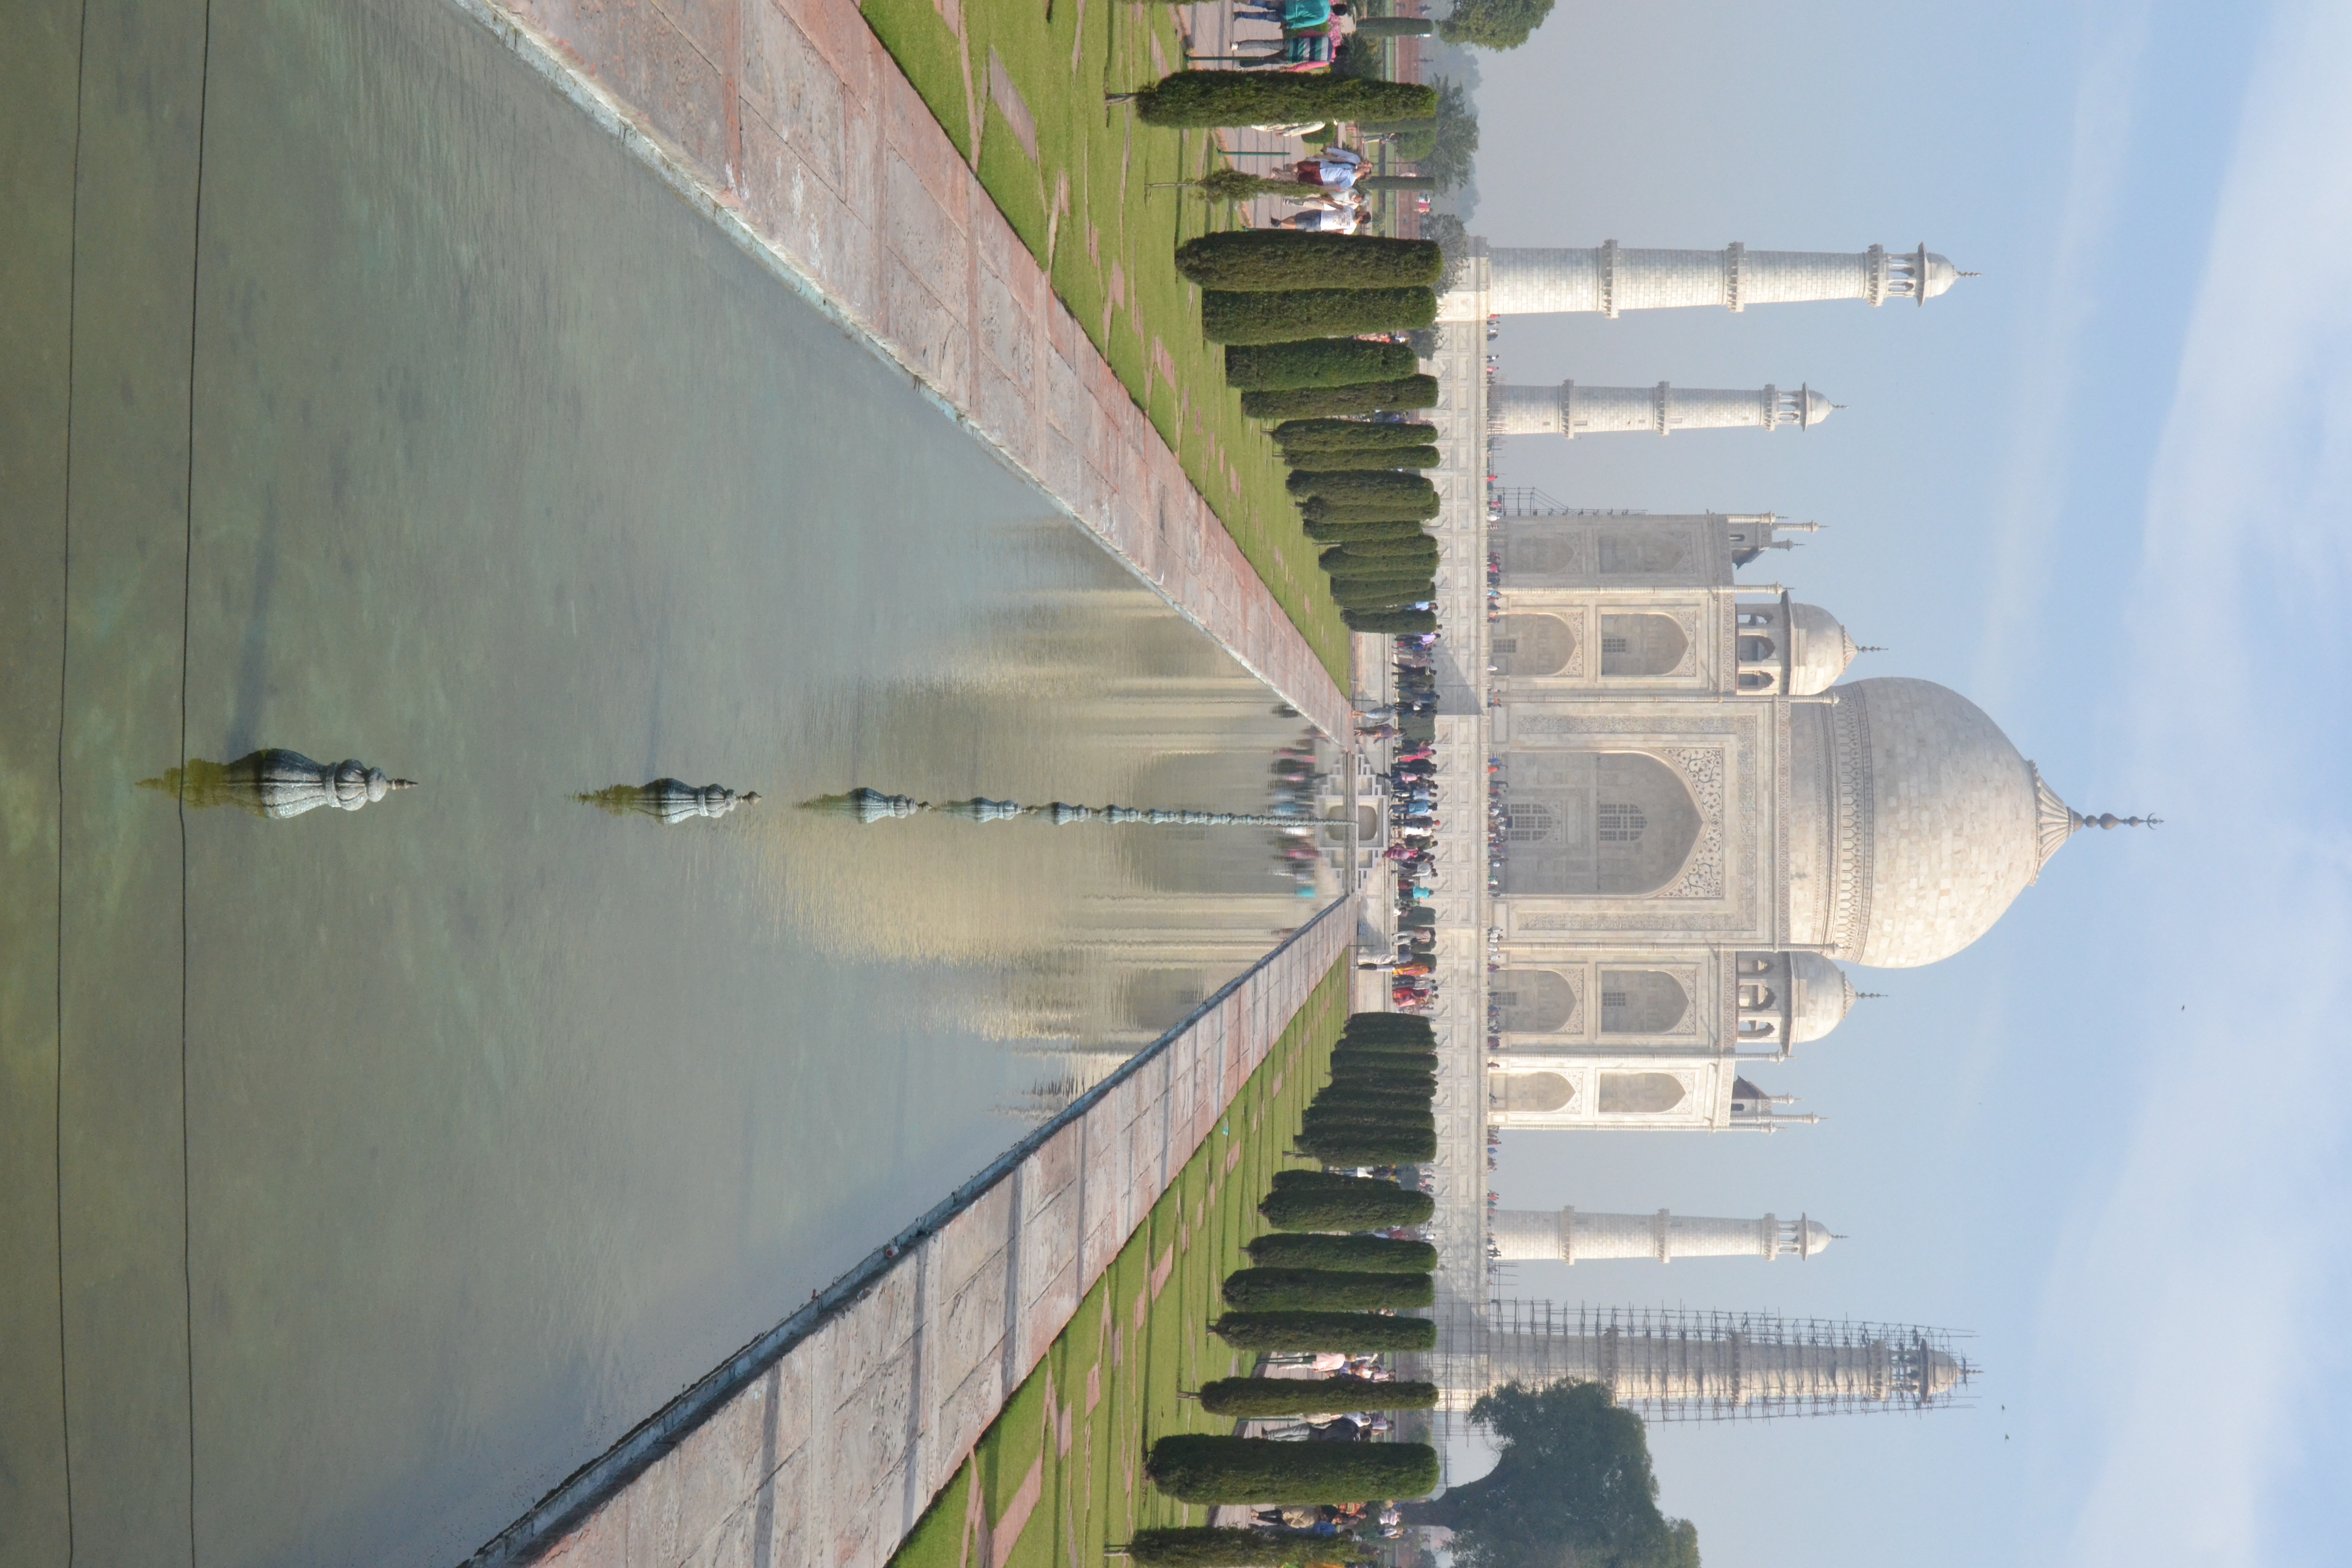 Day 03 March 23rd Delhi – Agra (225 kms - 4 hrs)